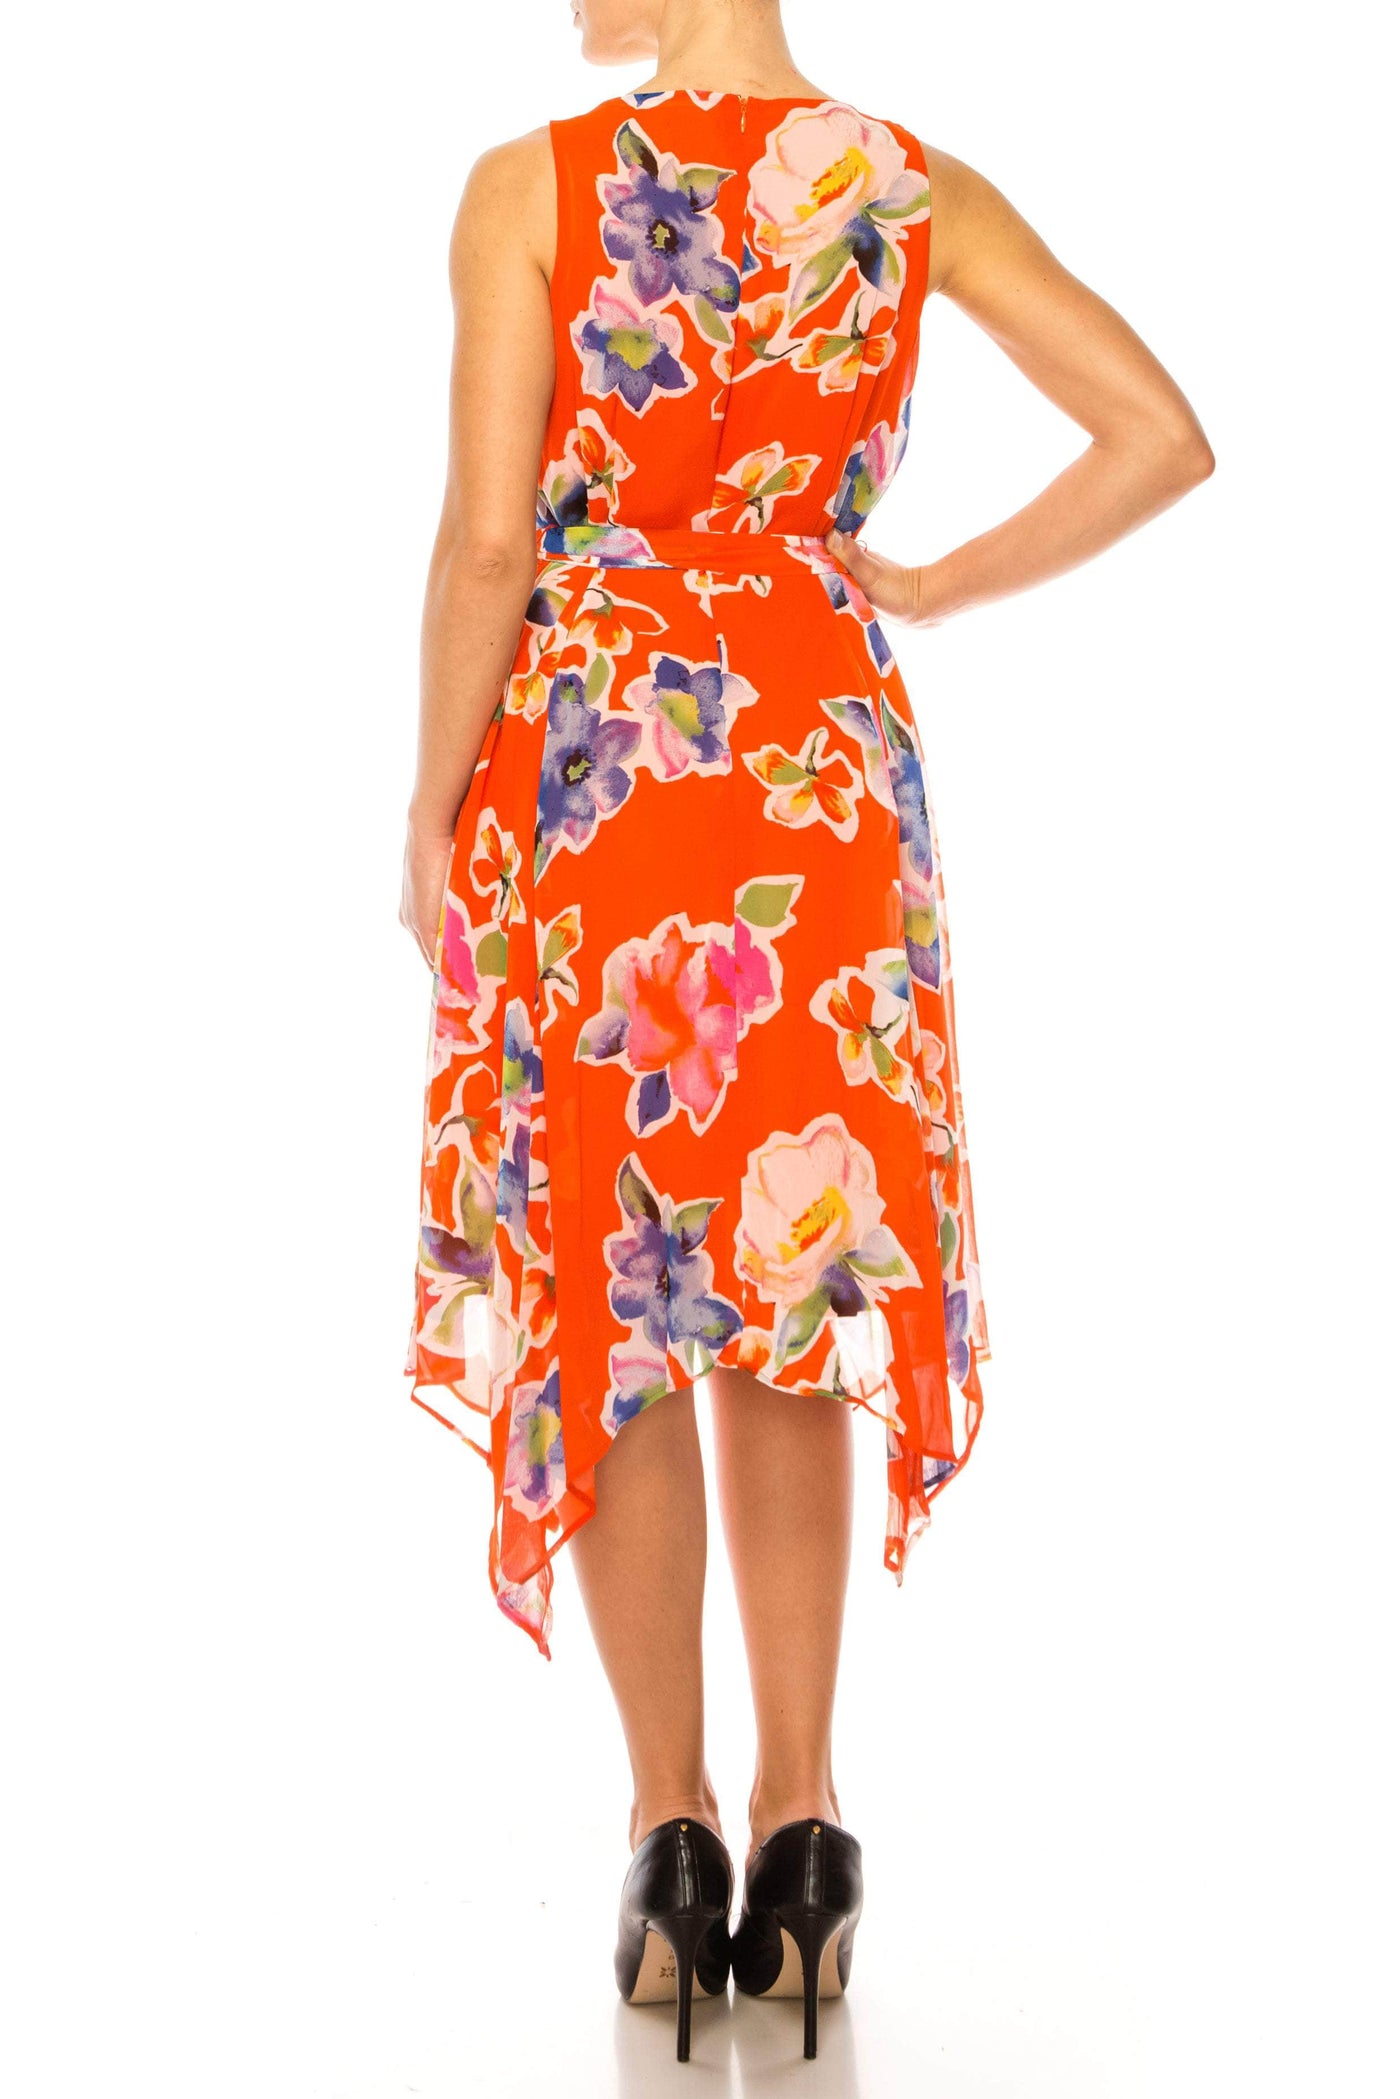 ILE Clothing CHP350 - Jewel Neck Floral Dress Special Occasion Dresses